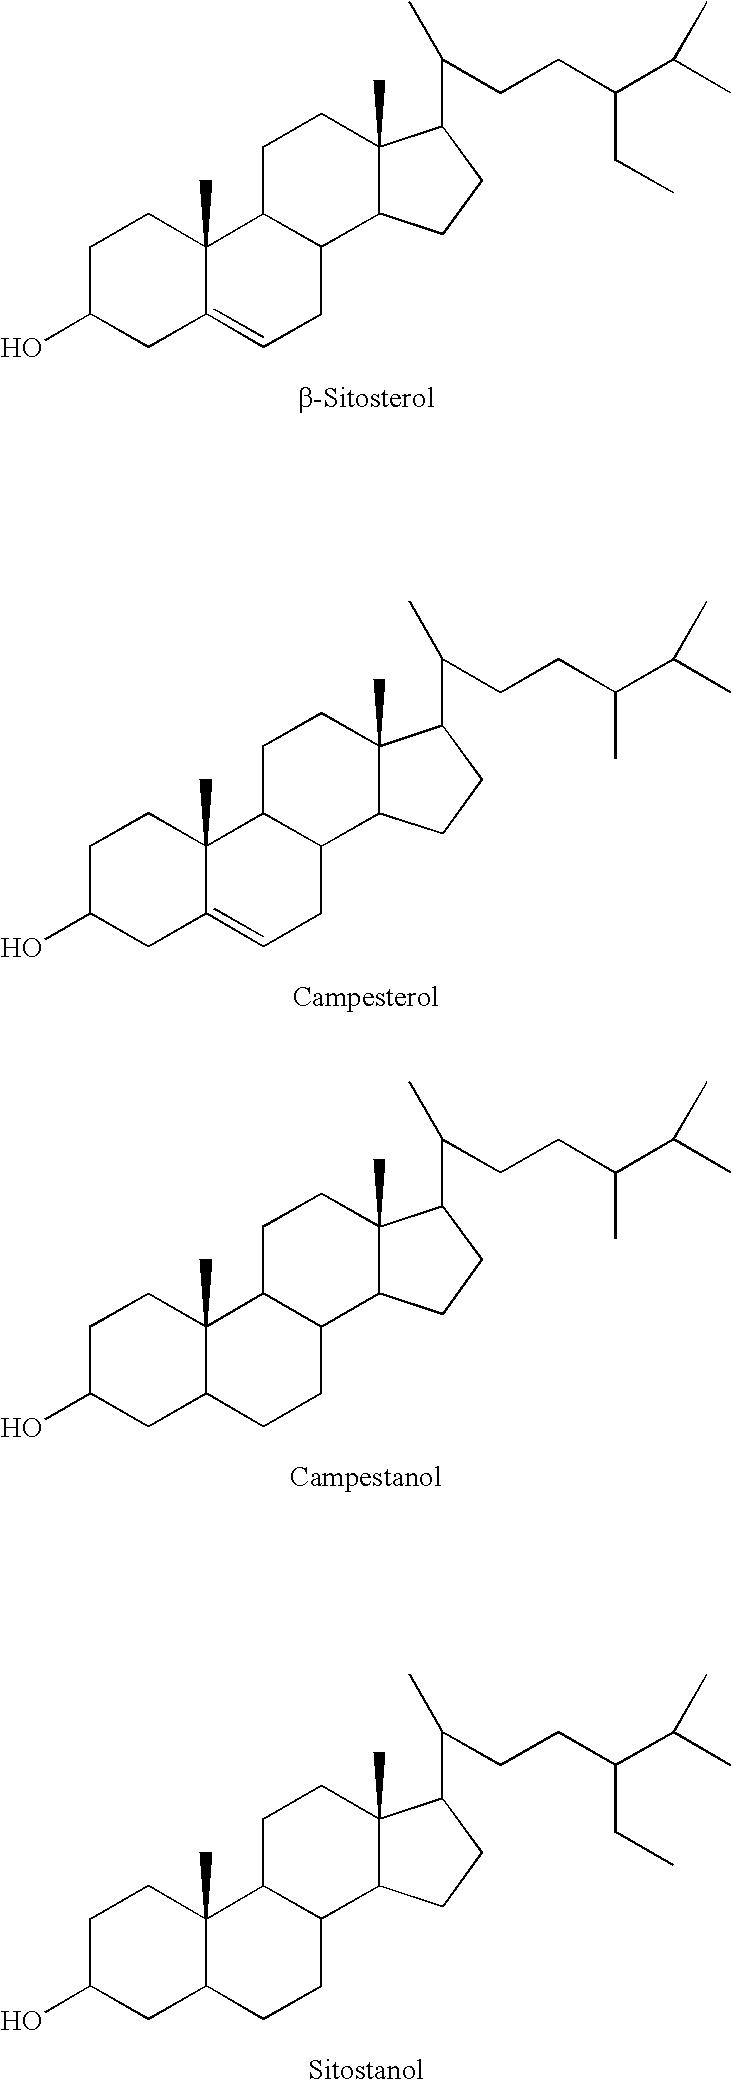 Ethercarboxylic acid ester of sterol or stanol